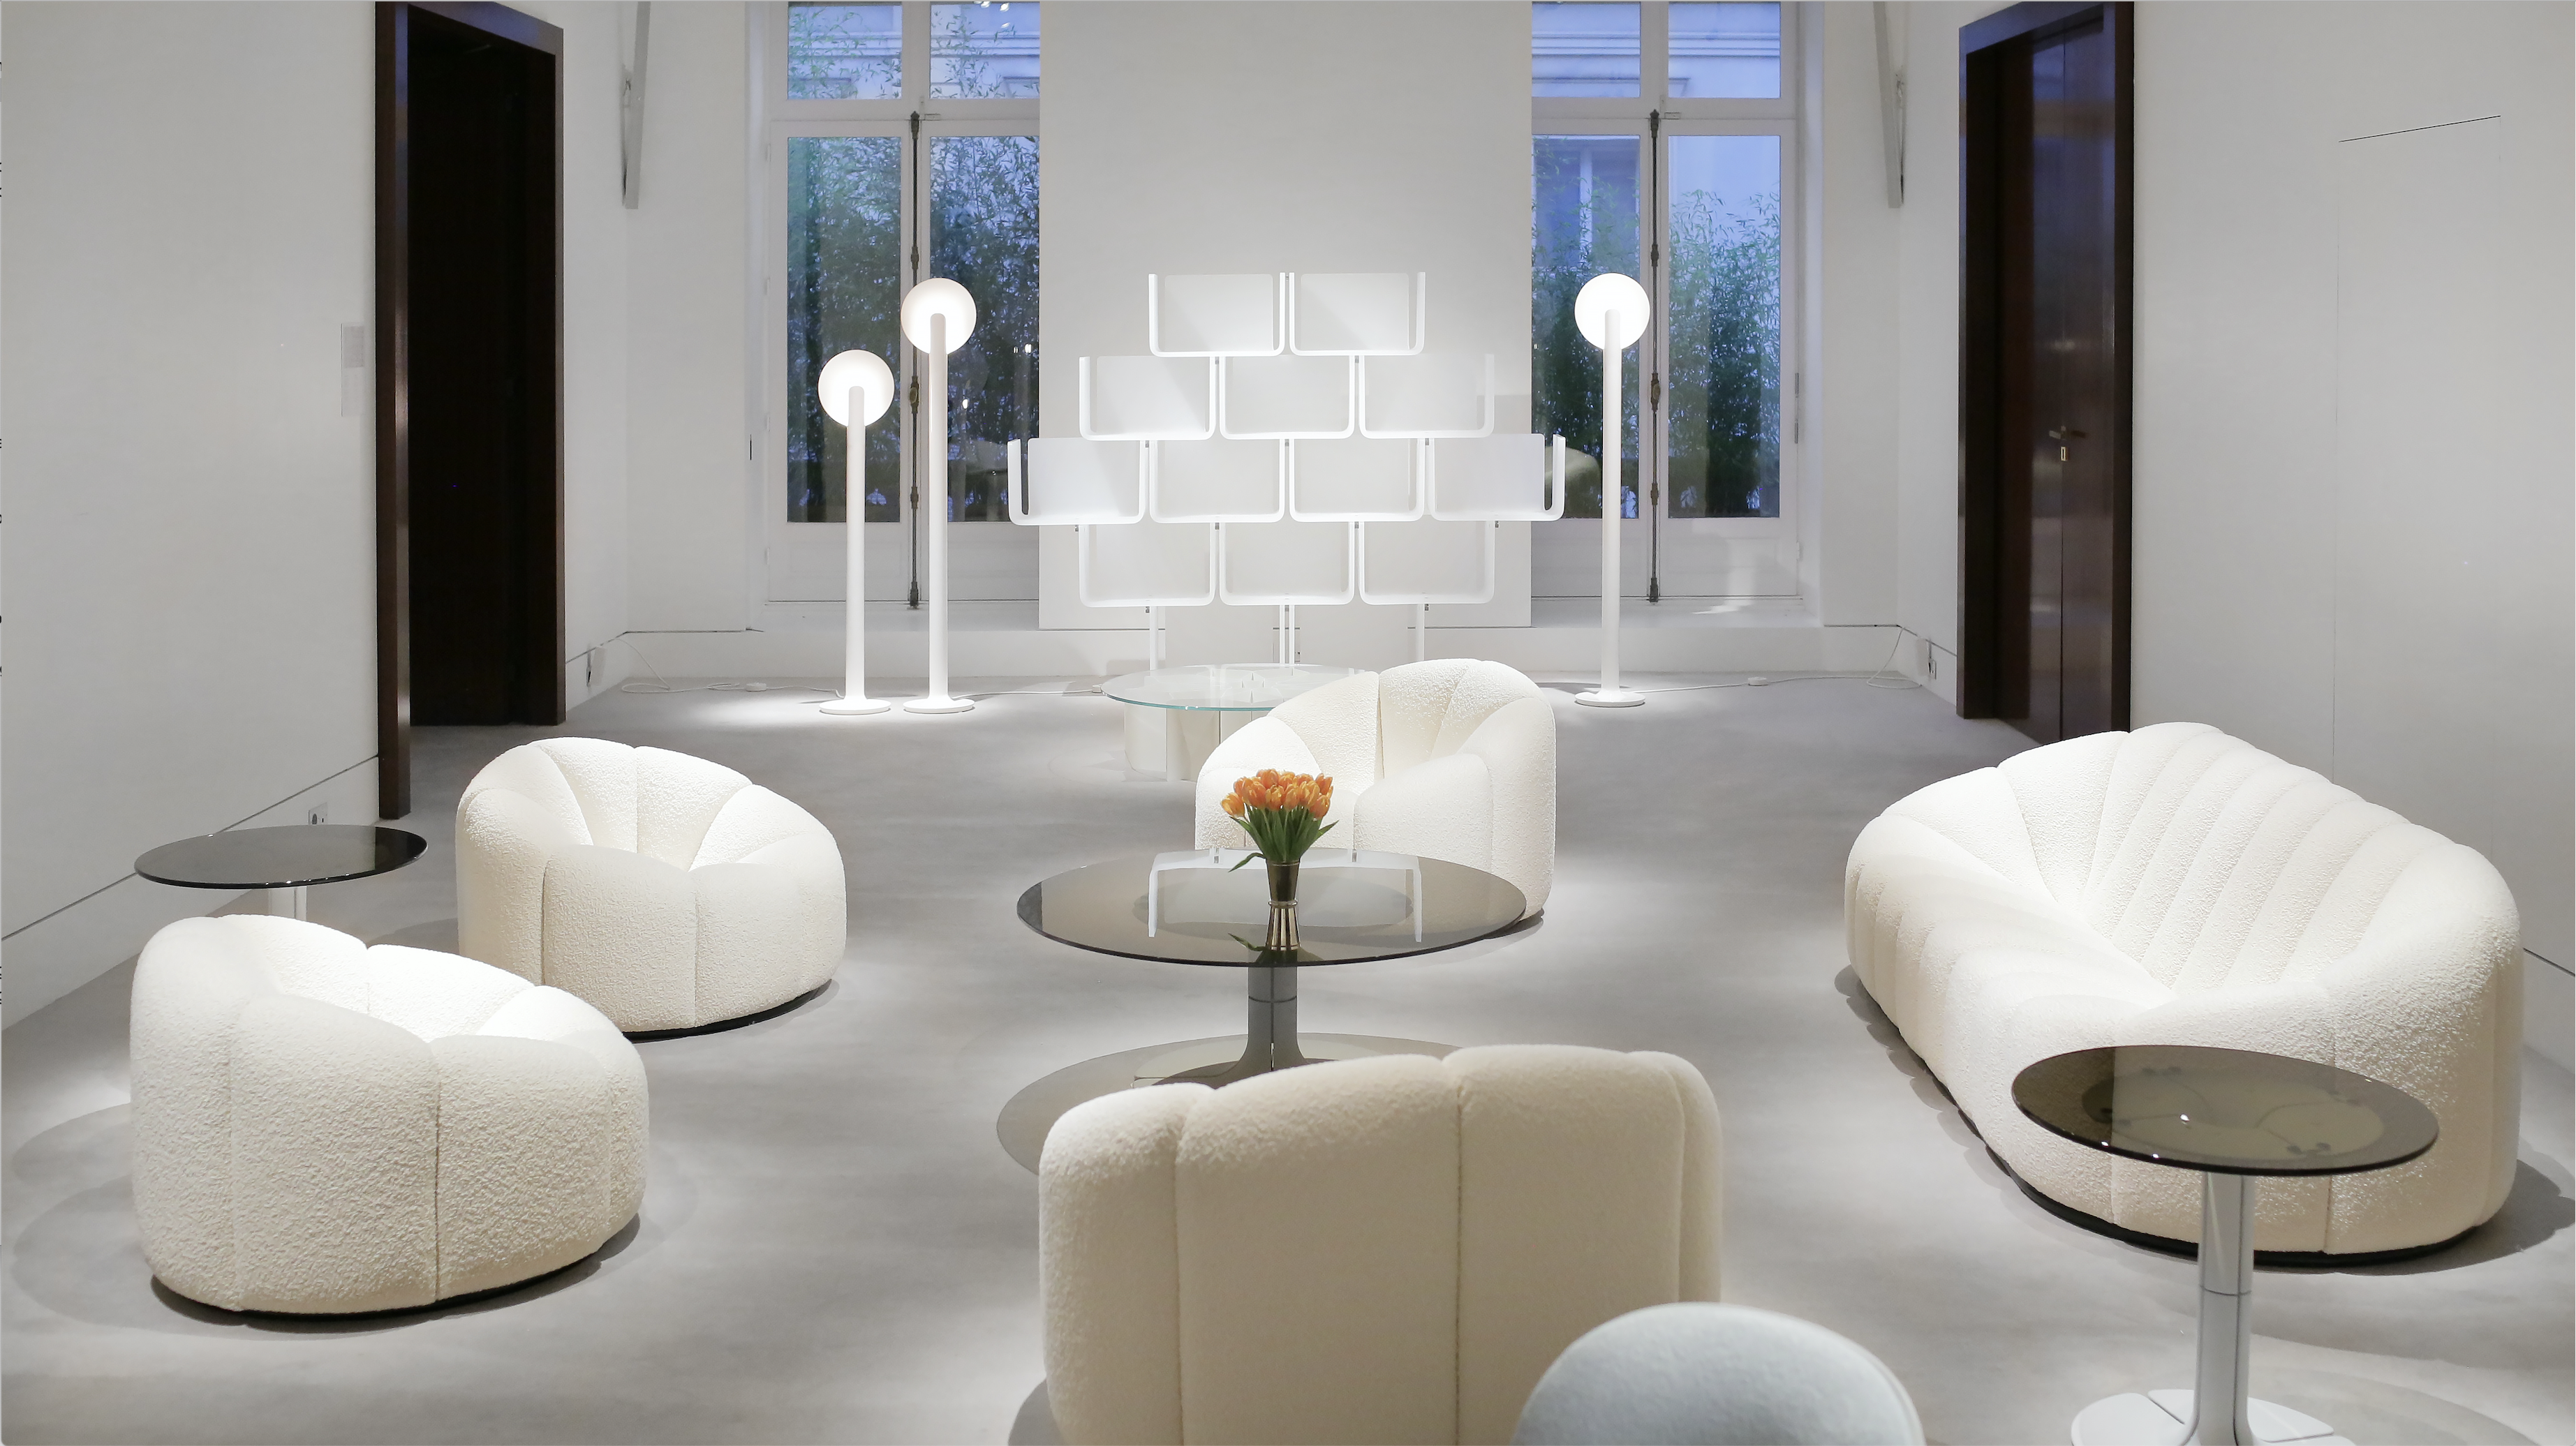 Louis Vuitton showcases a collection of forward-looking furnishings  designed by Pierre Paulin in the 1970s